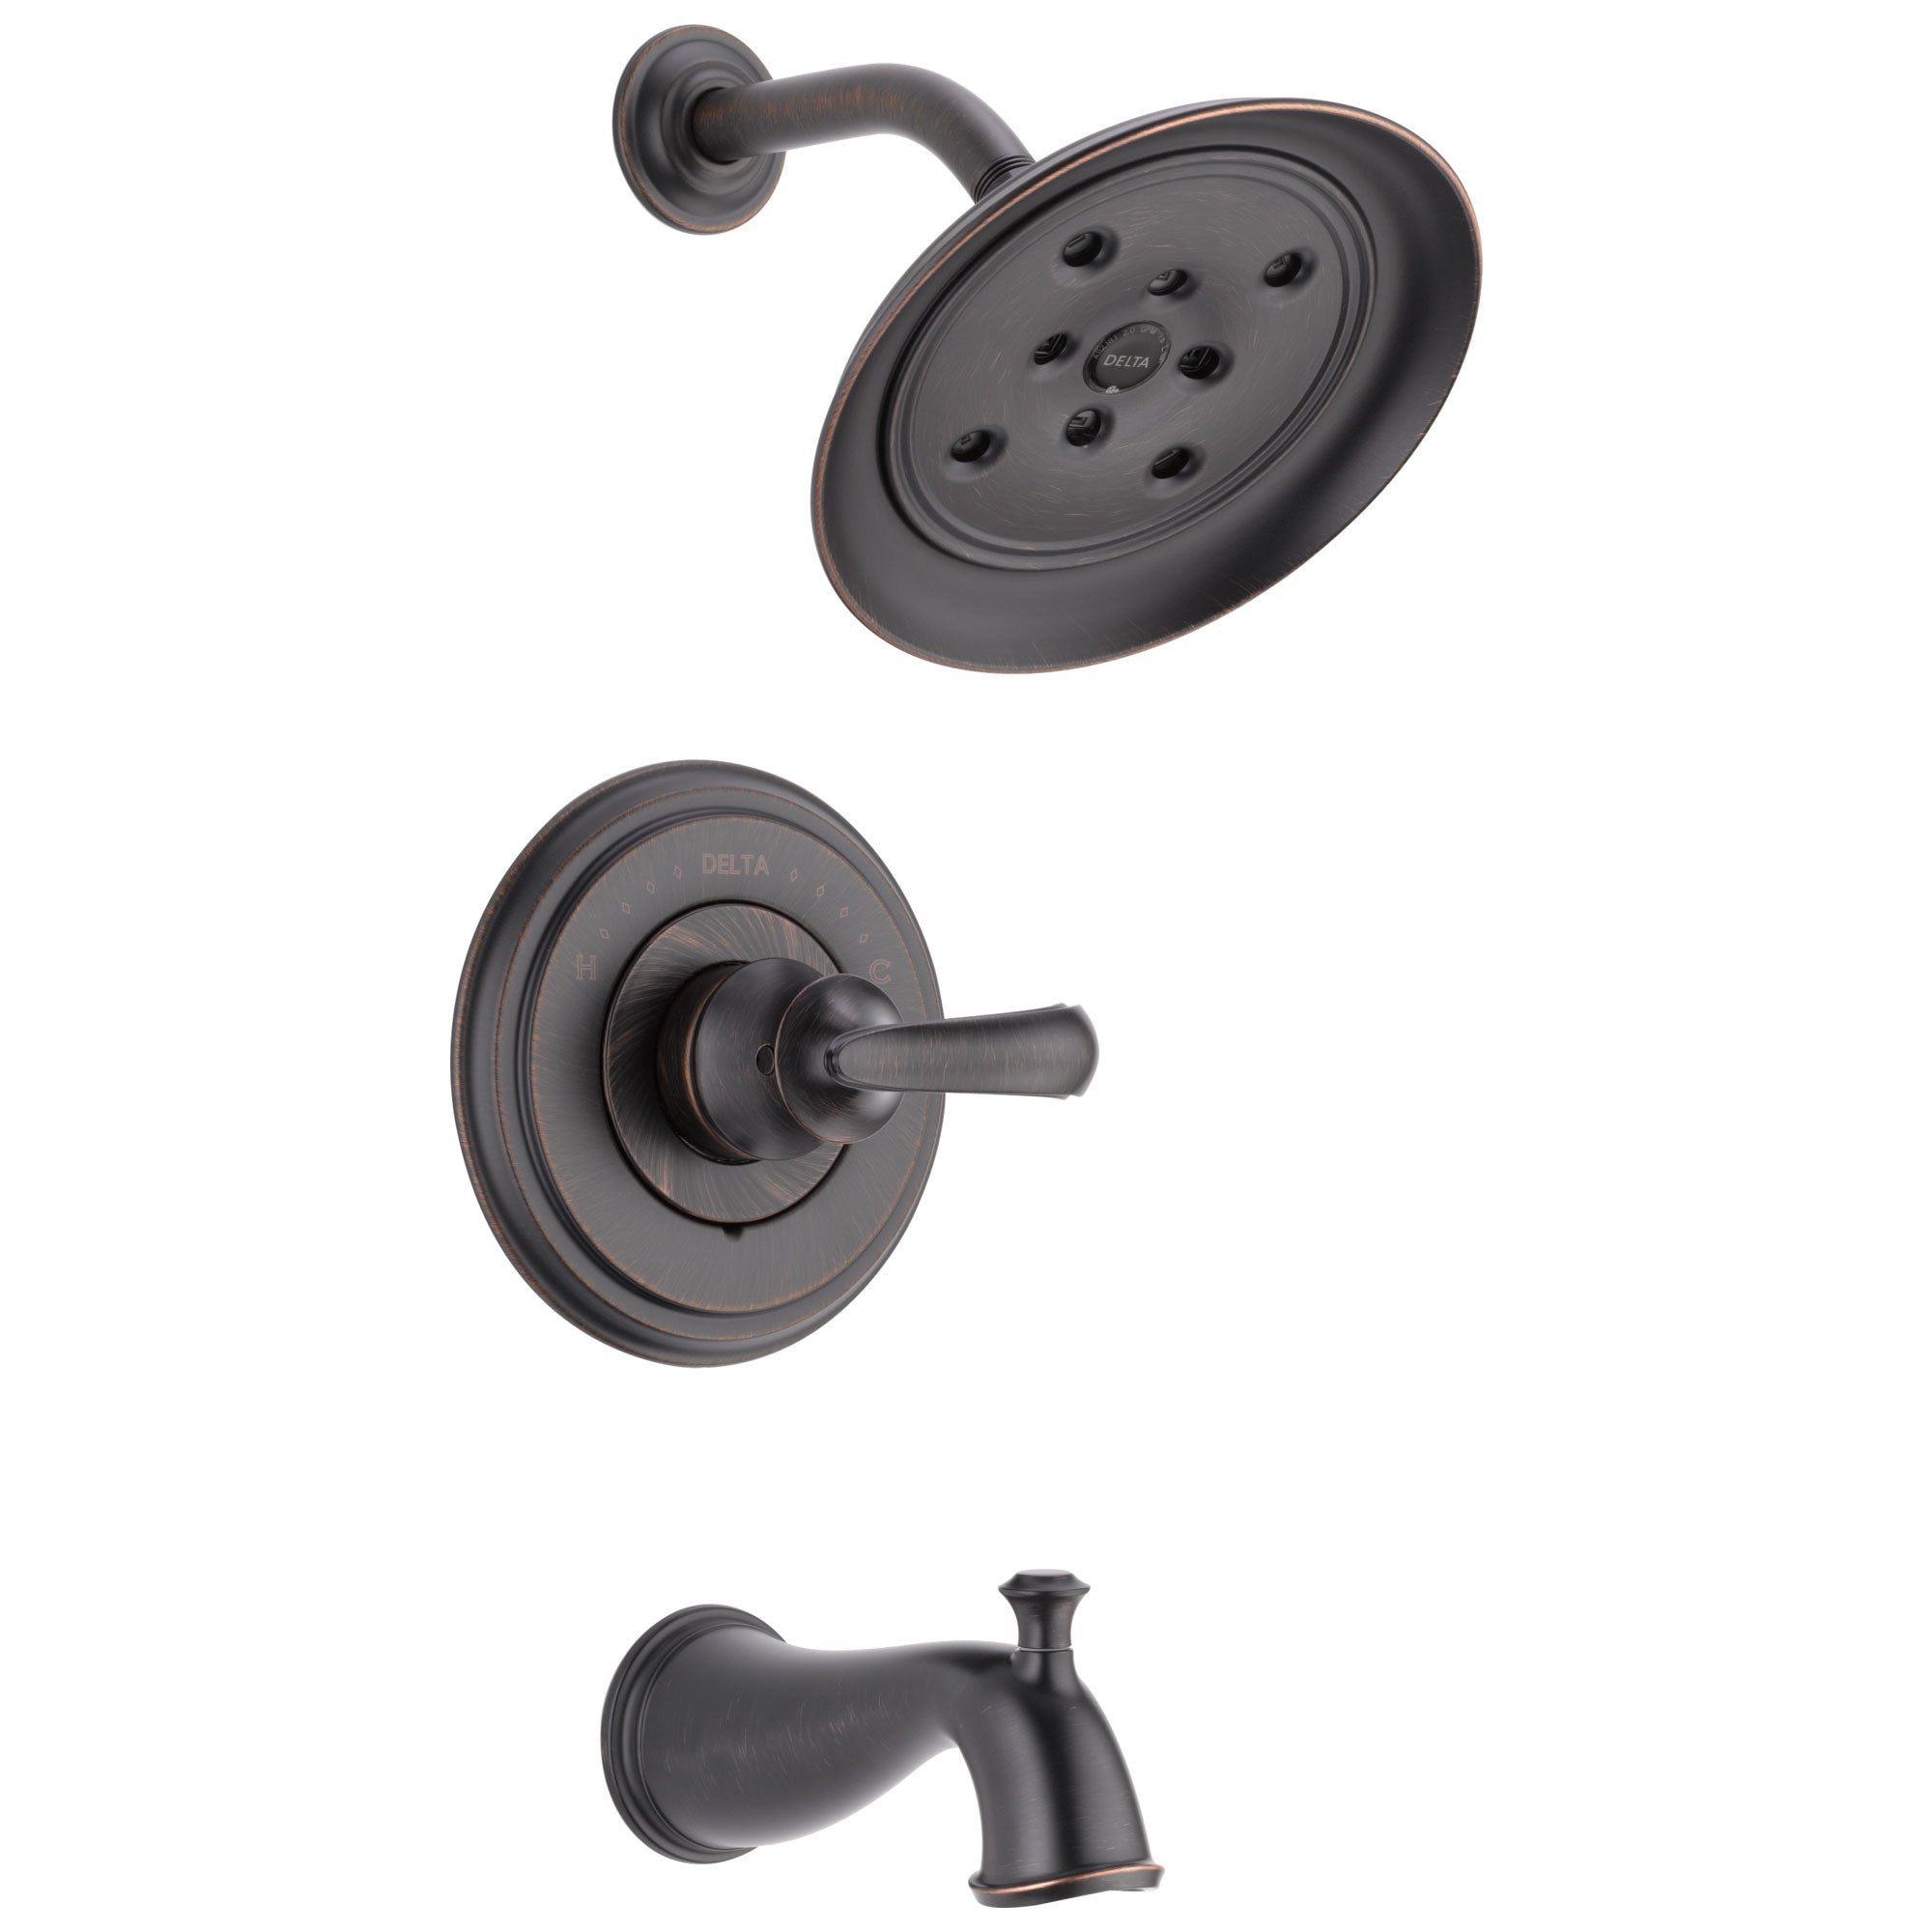 Delta Cassidy Collection Venetian Bronze Monitor 14 Tub and Shower Faucet Combination INCLUDES Single Scroll Lever Handle and Rough-Valve without Stops D1472V